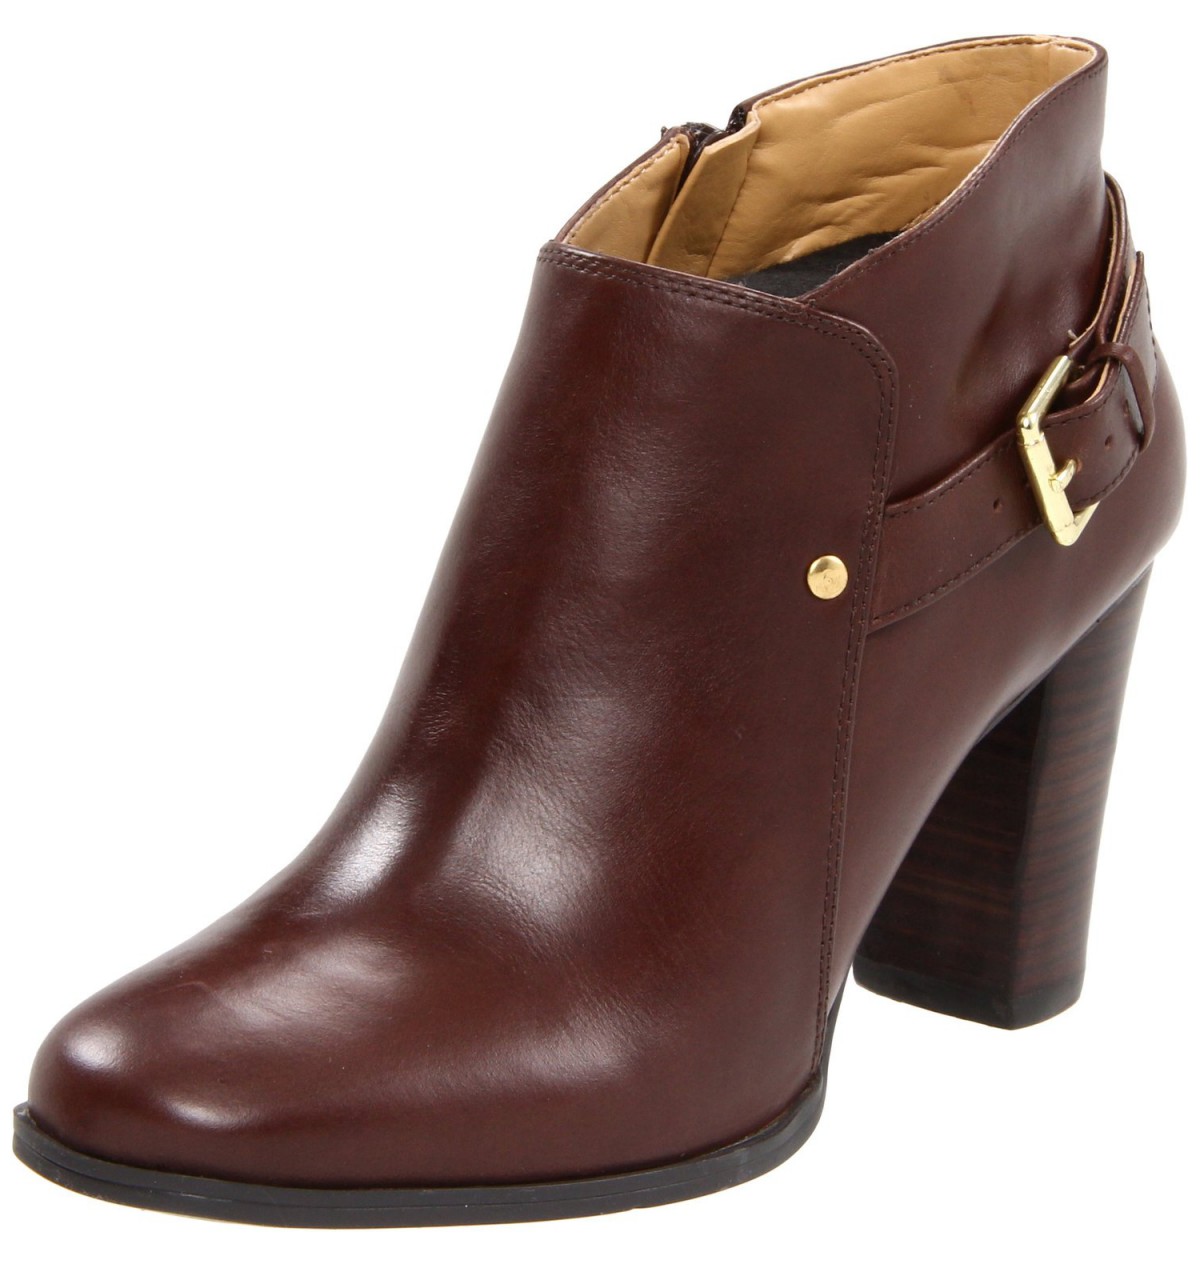 Nine West Women's Effia Ankle Boot - Visuall.co